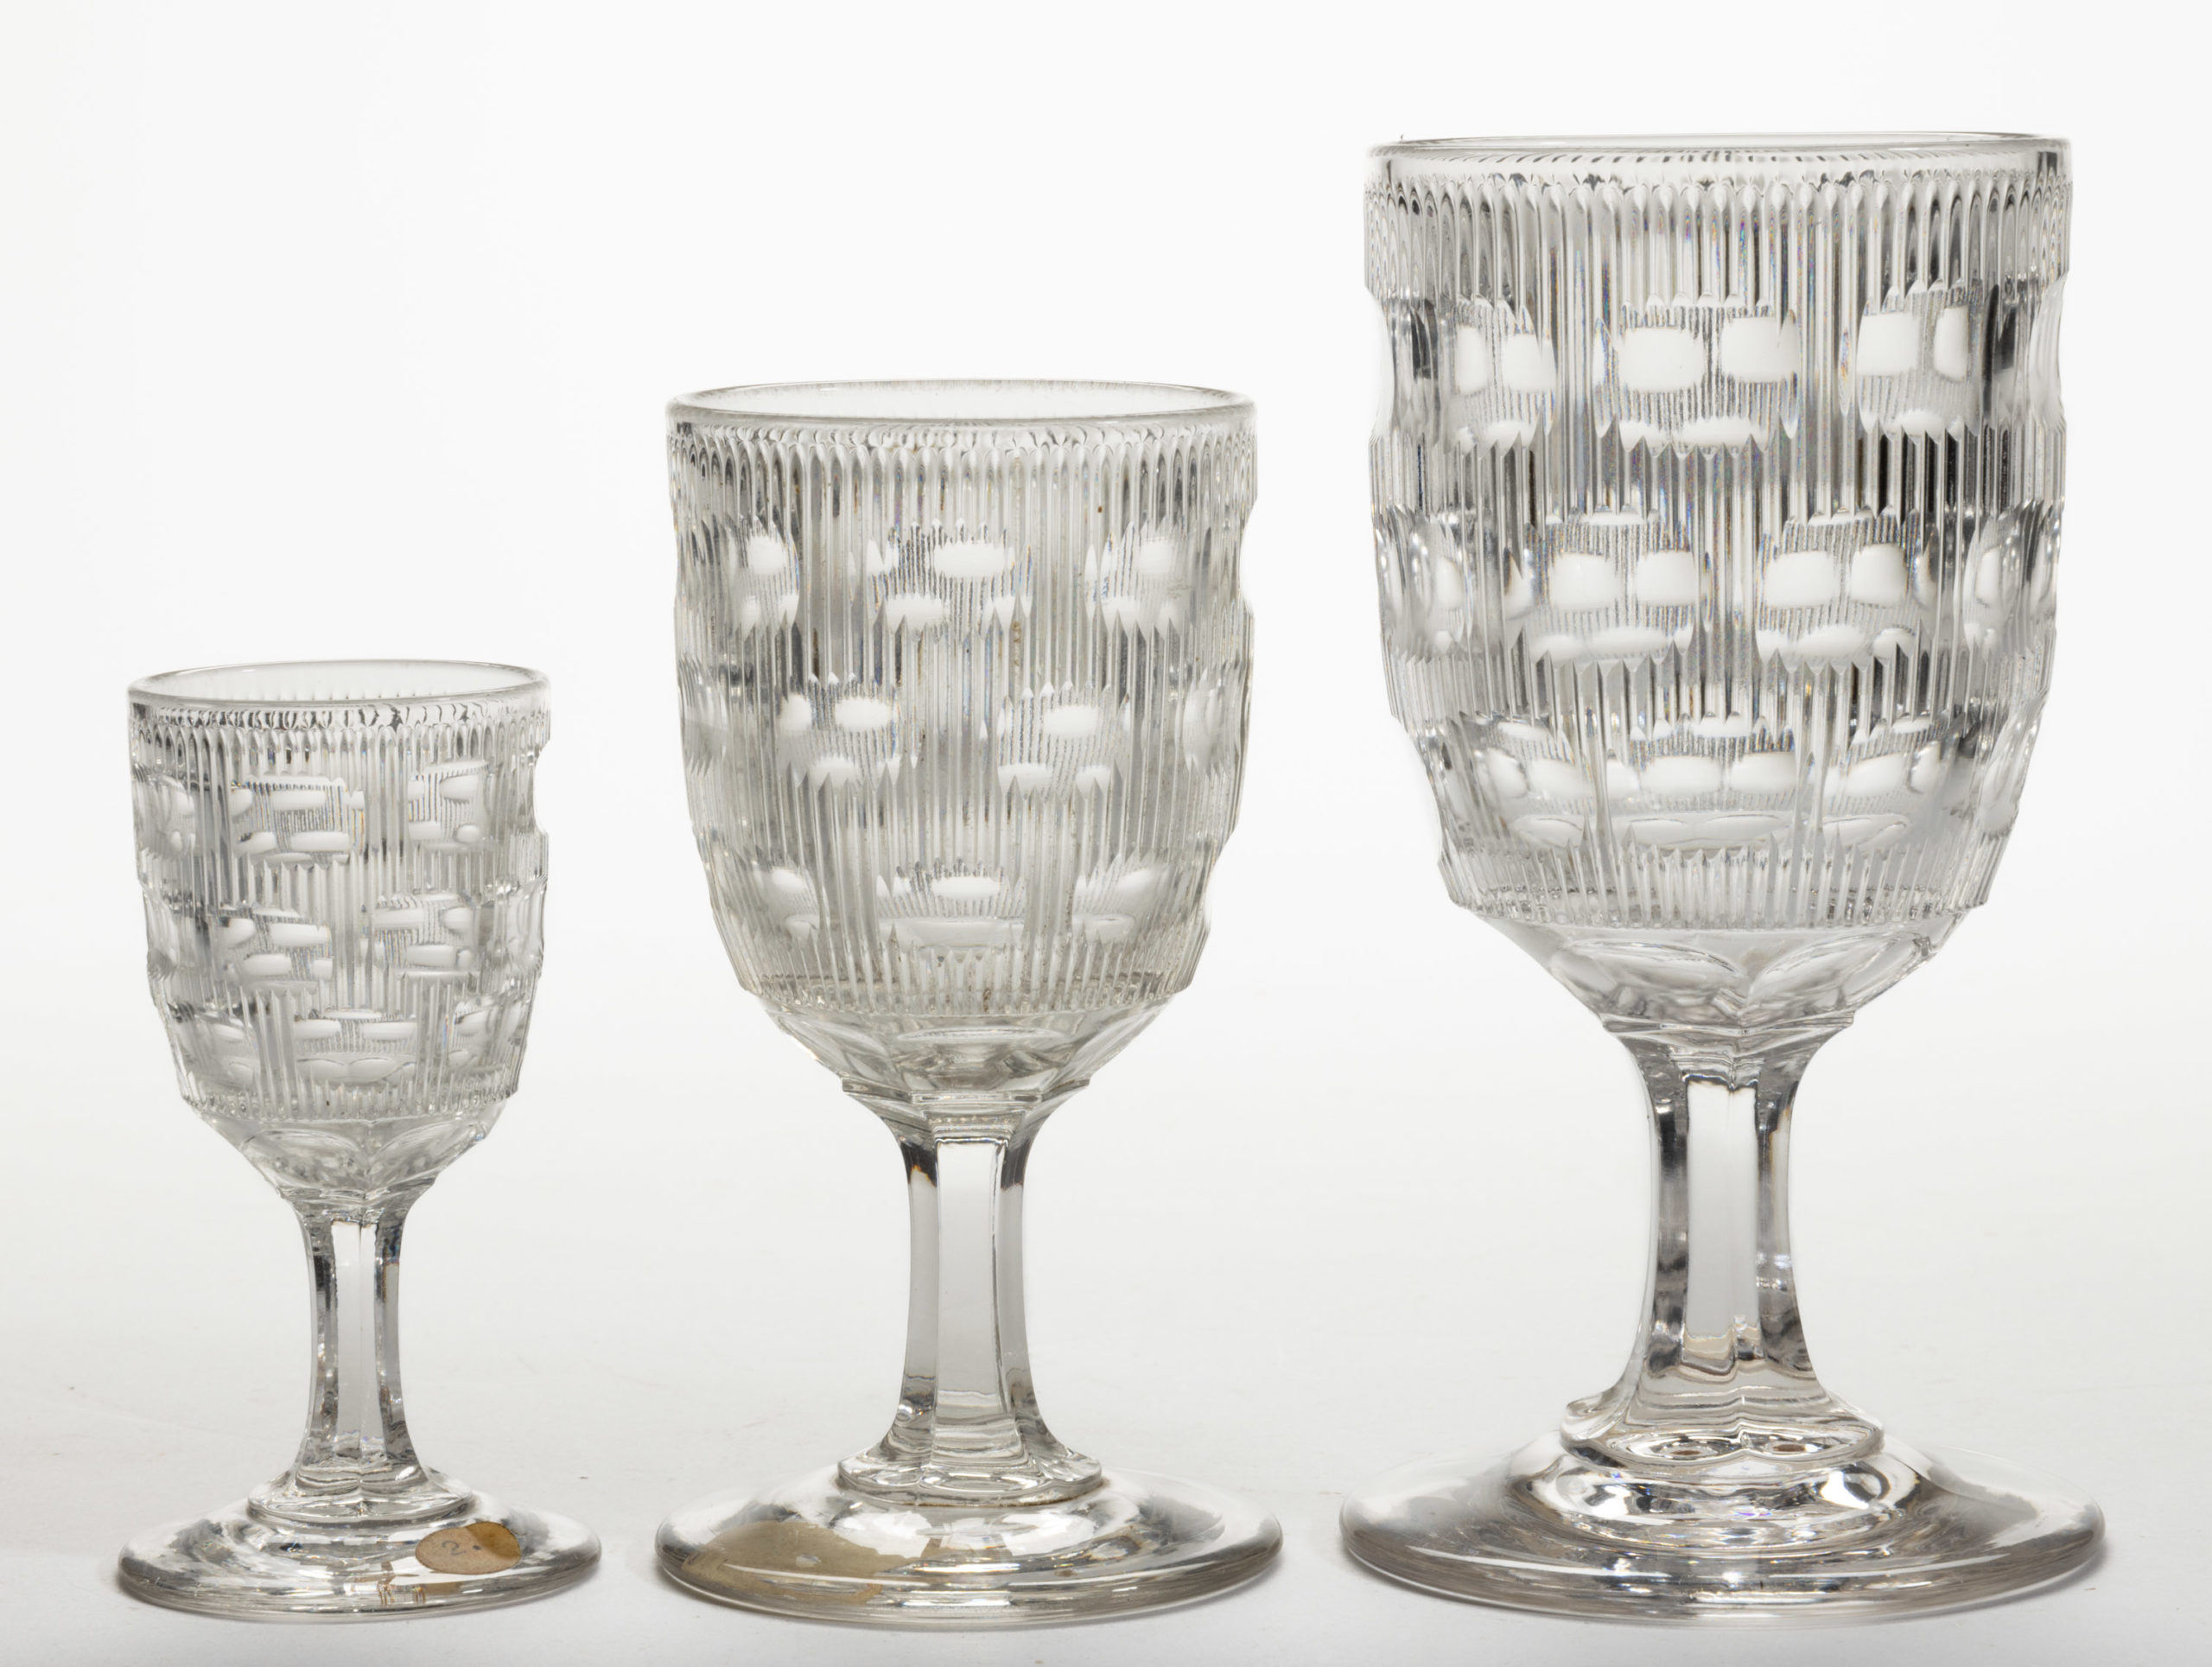 FINE RIB / REEDED (OMN) WITH CUT OVALS – THREE ROW DRINKING ARTICLES, LOT OF THREE,